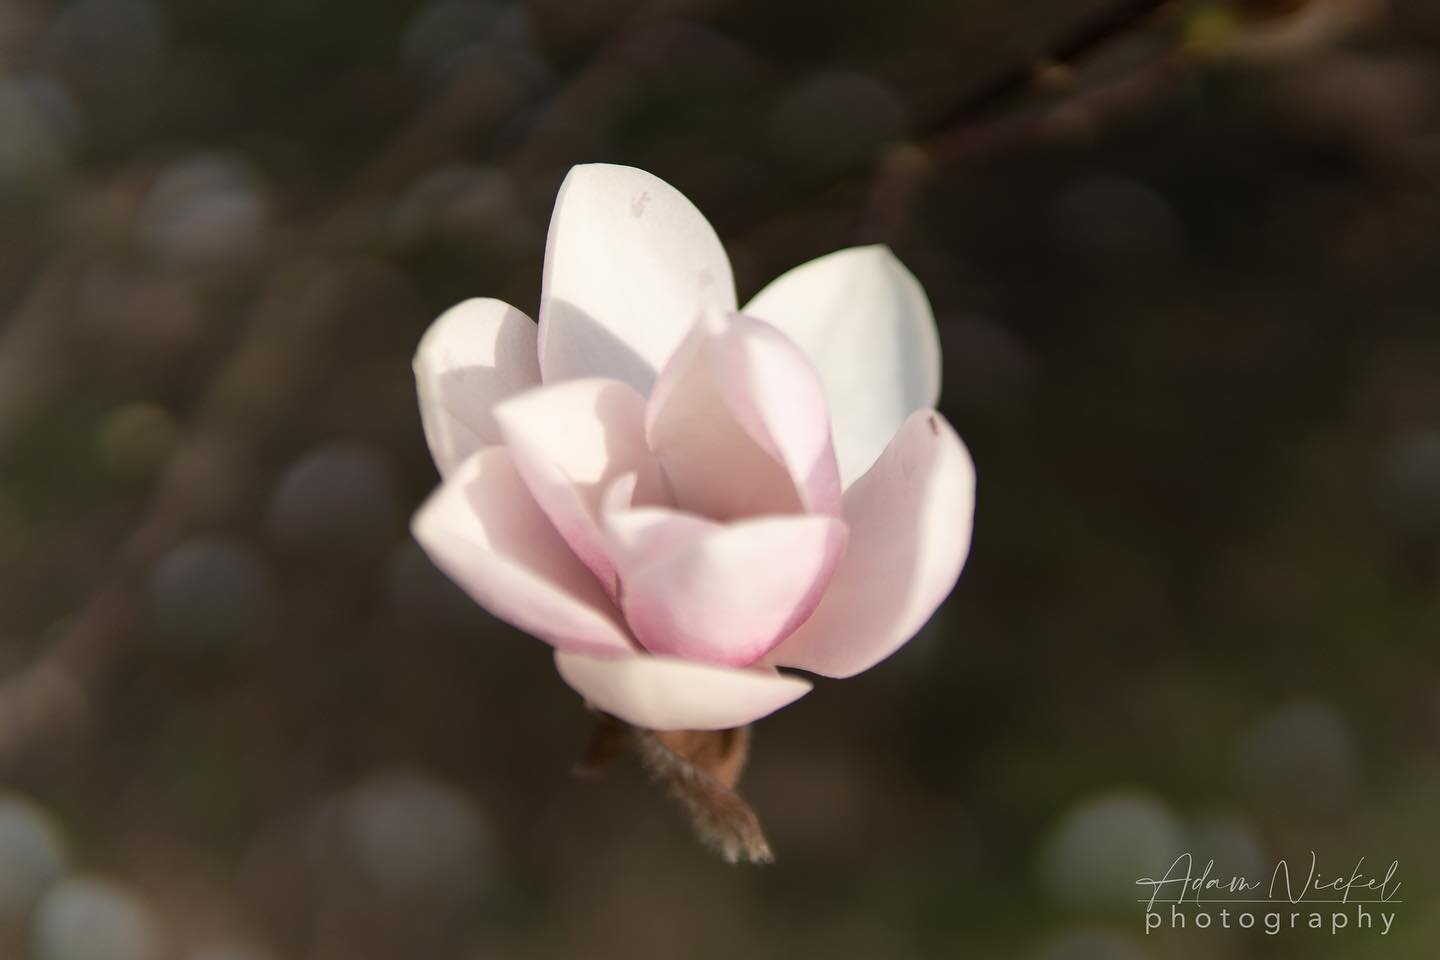 Spring flowers just make gorgeous photos. #flowers #flowersofinstagram  #flowerphotography #photo #photooftheday #photography #naturephotography #nature #naturelovers #pictureoftheday #pink  #pinkflowers @only.in.maryland @visitmaryland #marylandphot